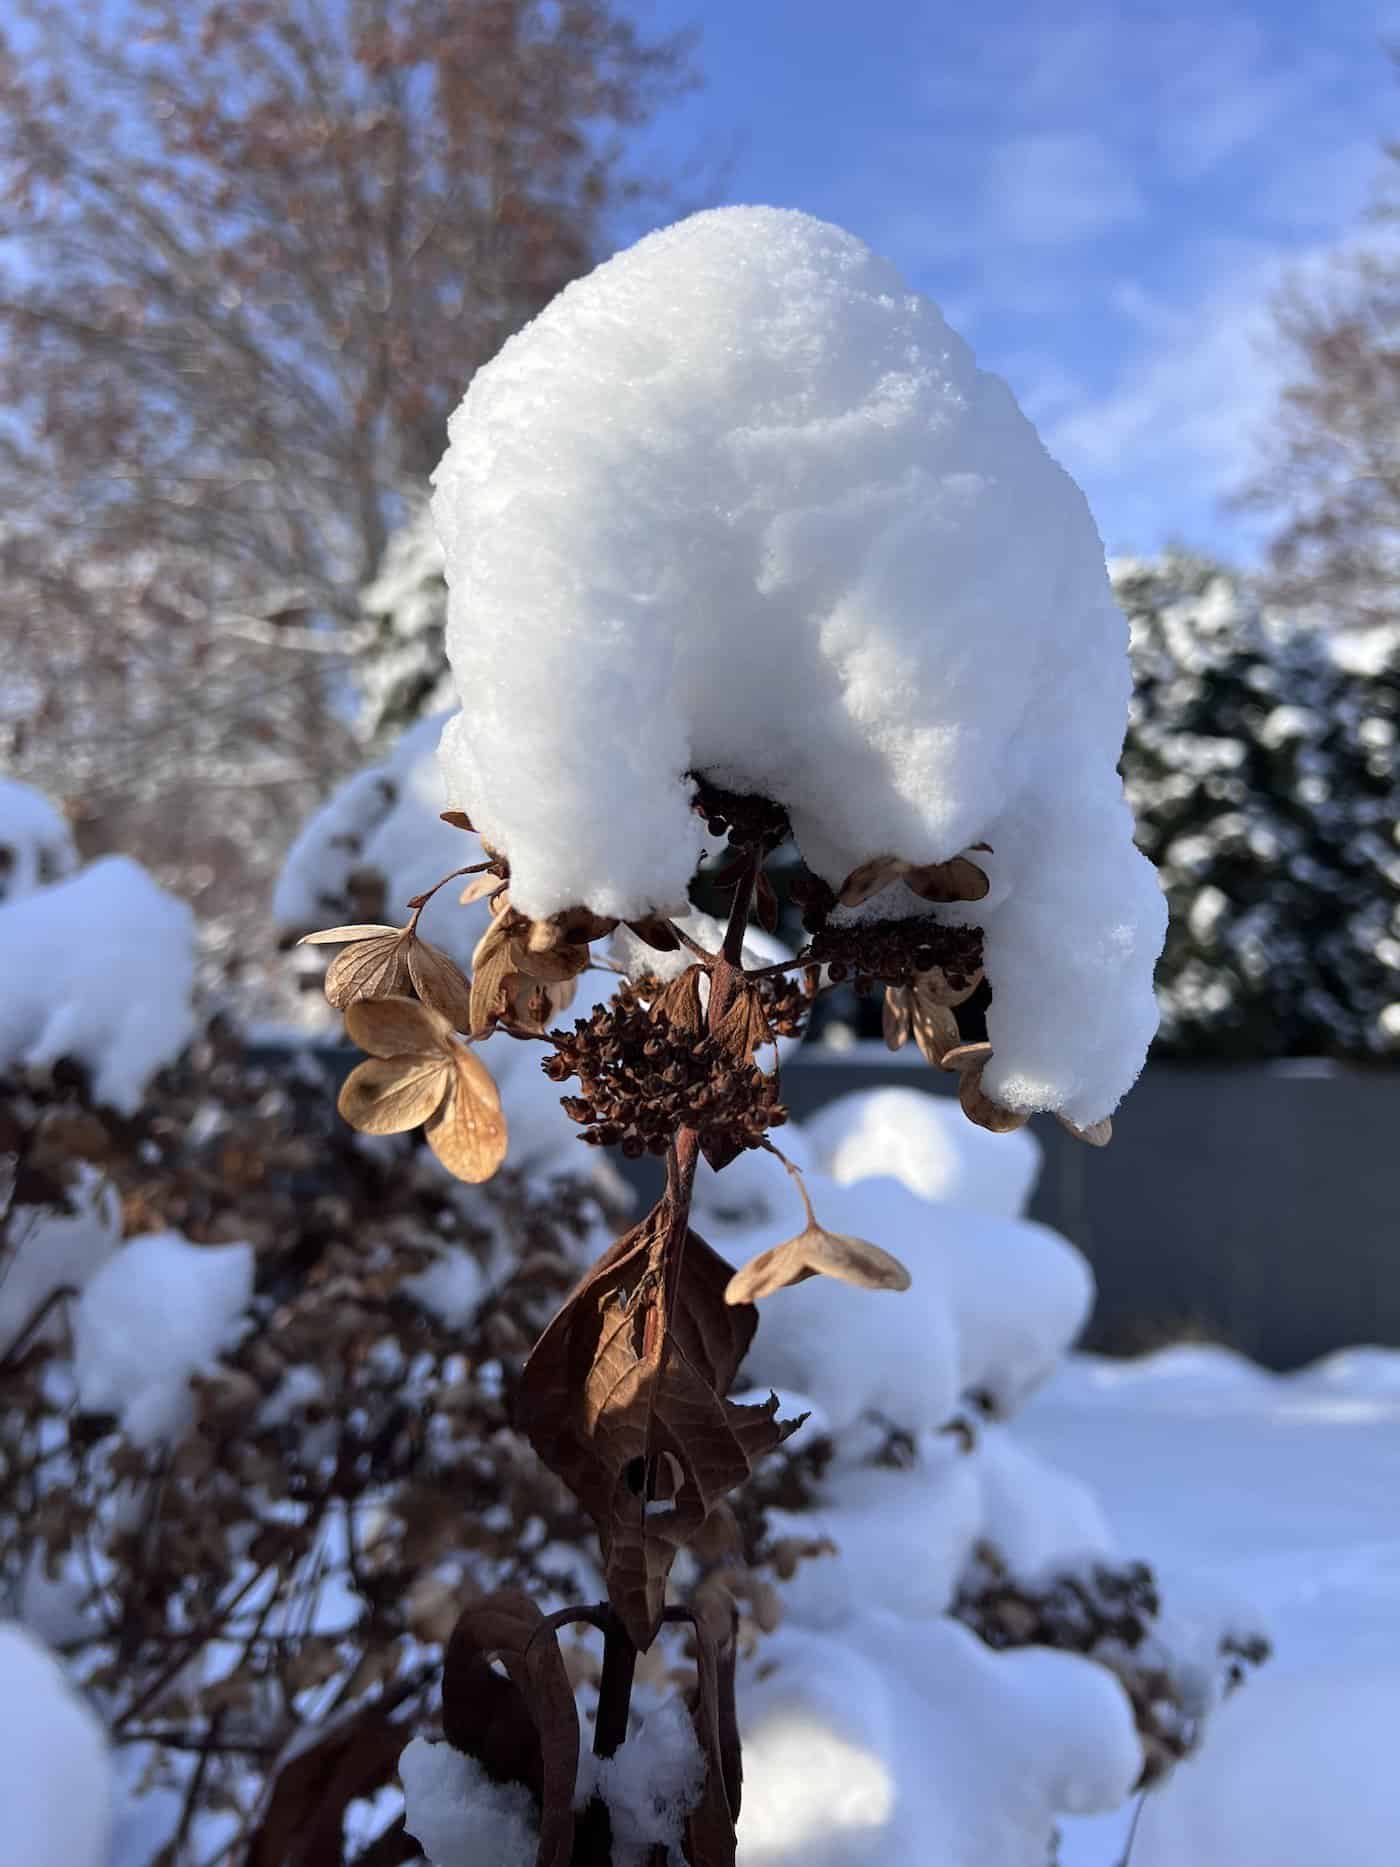 Hydrangea tree dried blossom with snow in winter